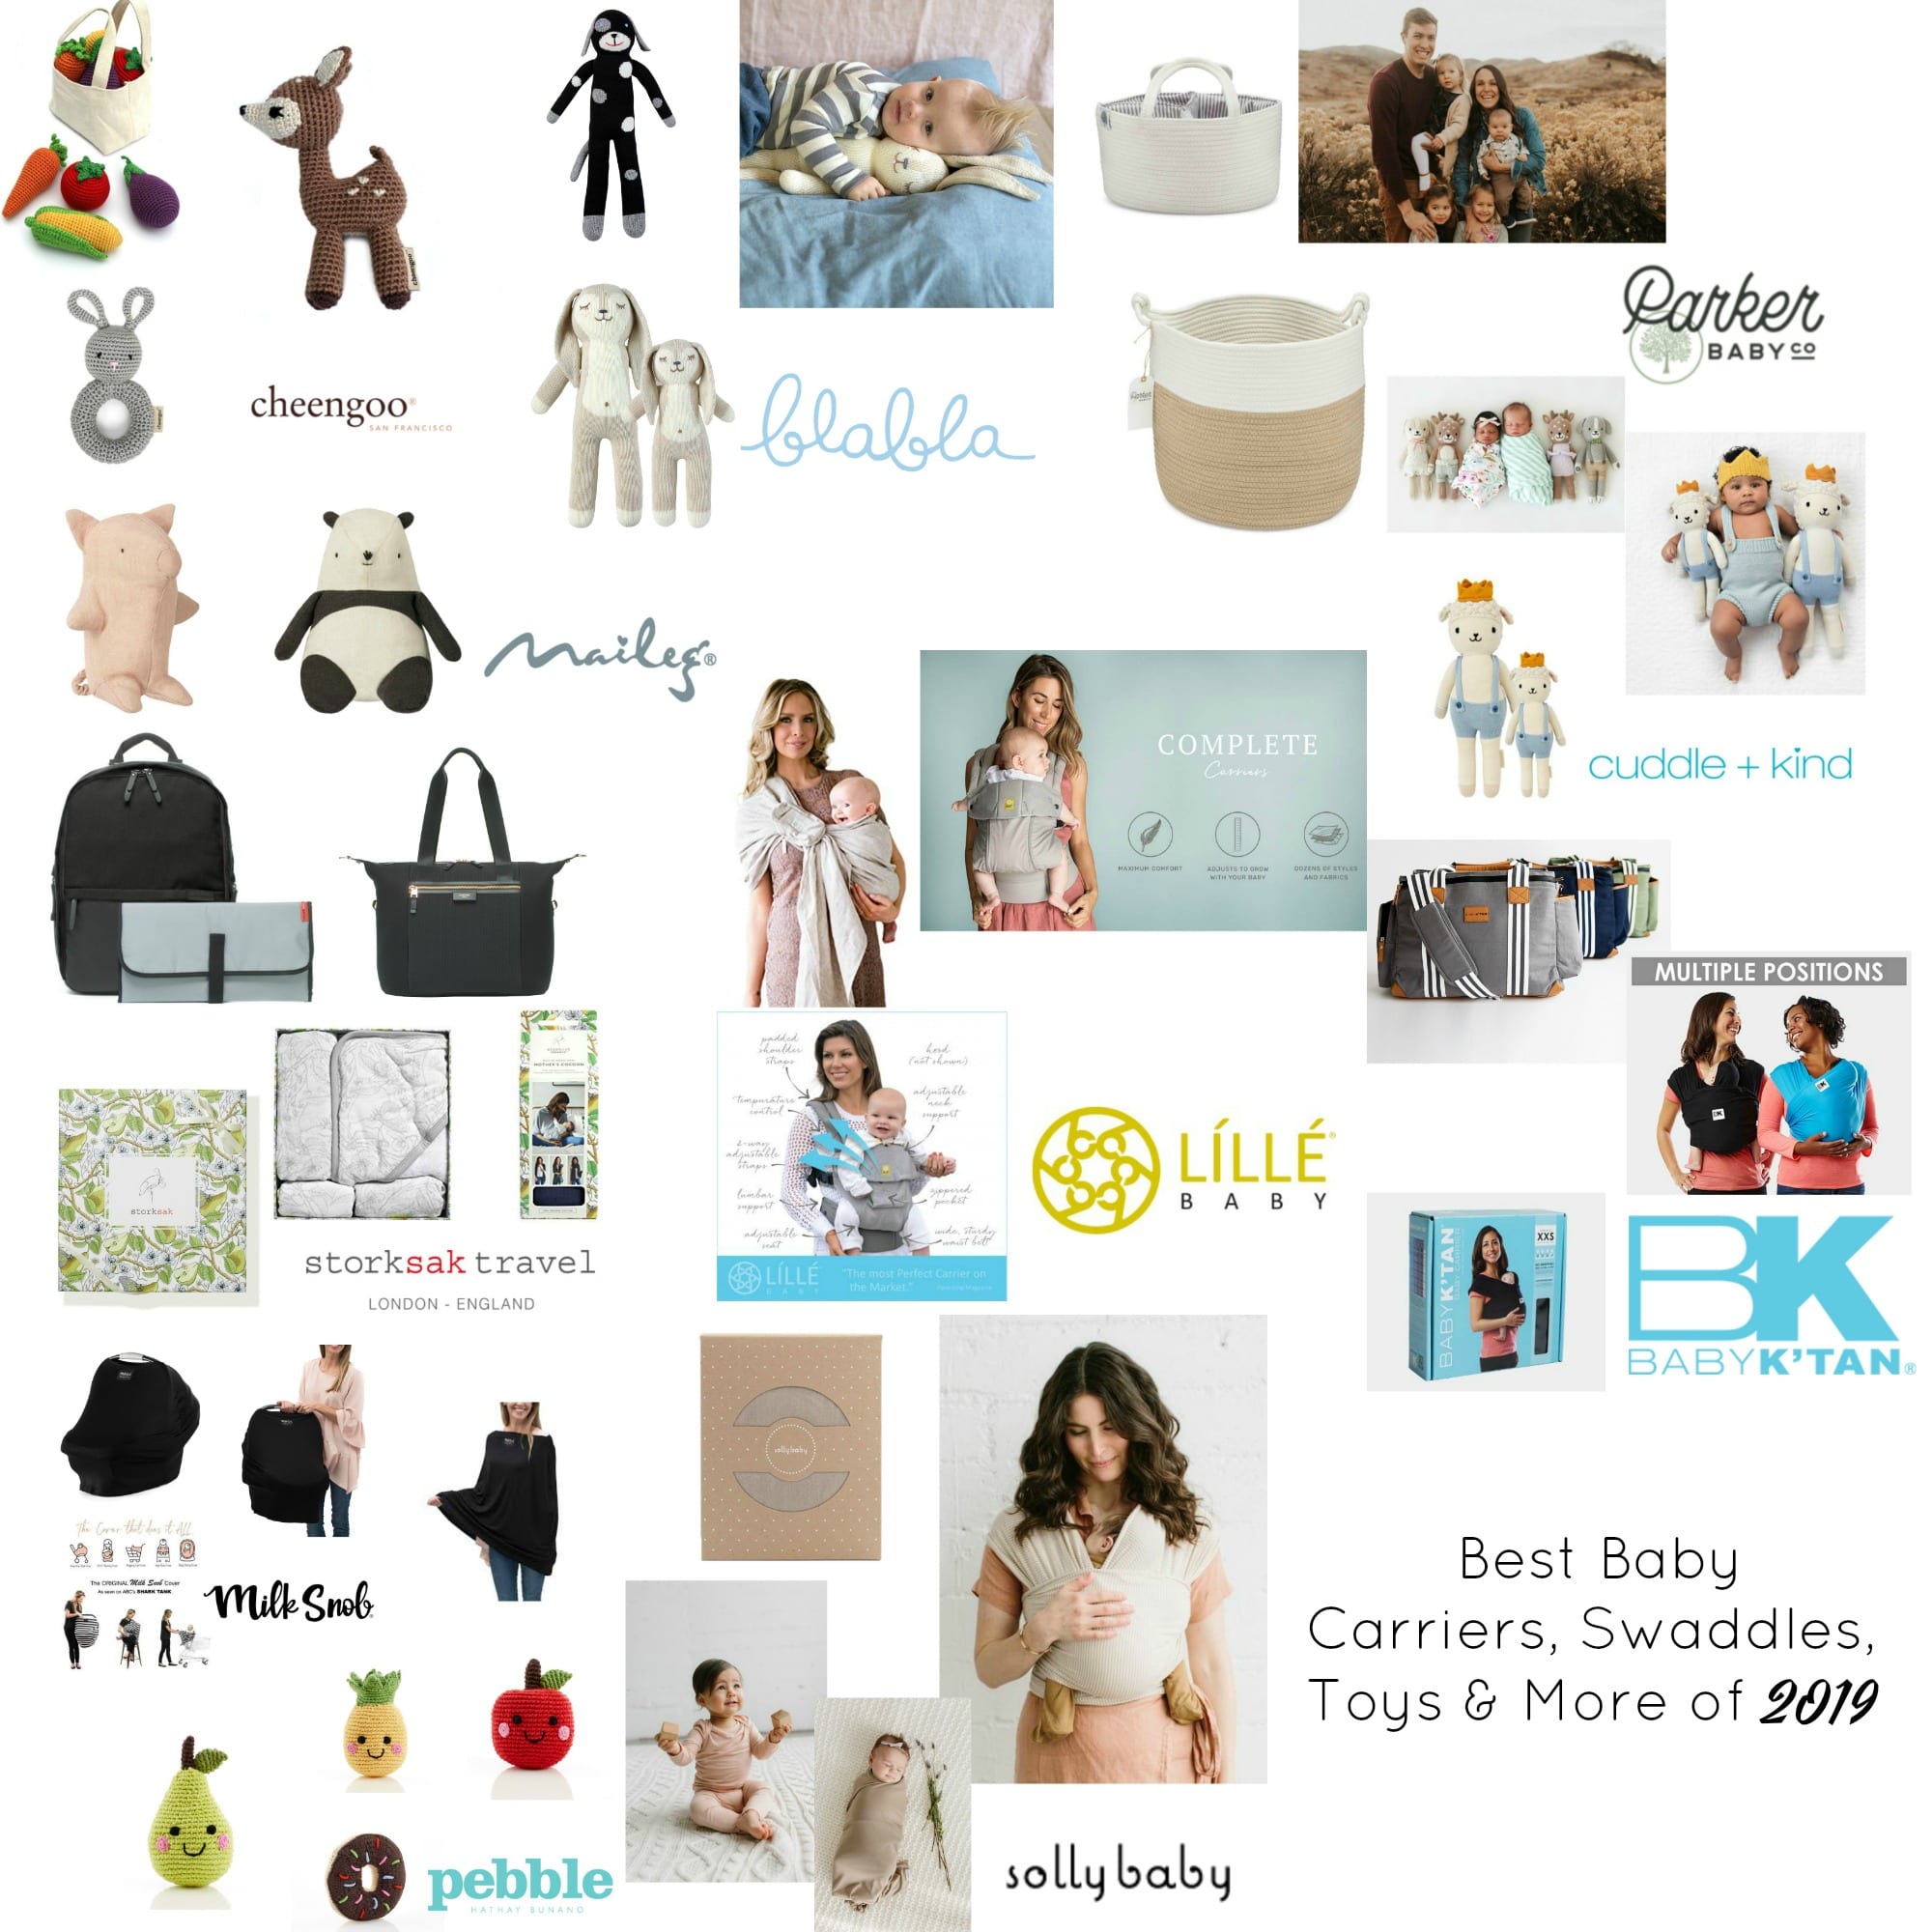 The Best Baby Carriers, Swaddles, Toys & More